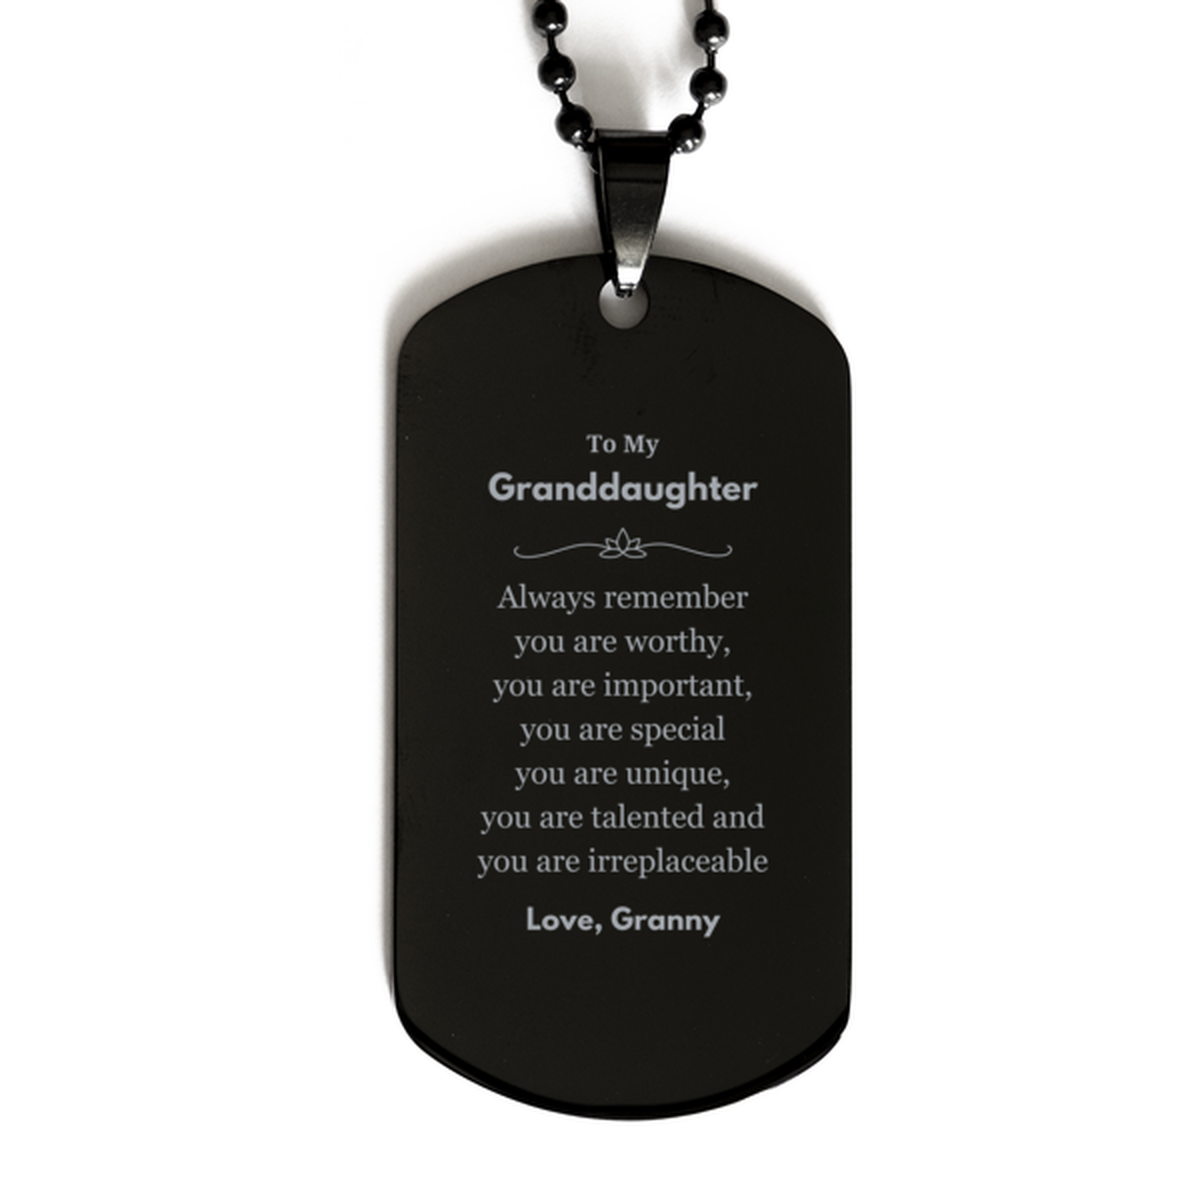 Granddaughter Birthday Gifts from Granny, Inspirational Black Dog Tag for Granddaughter Christmas Graduation Gifts for Granddaughter Always remember you are worthy, you are important. Love, Granny